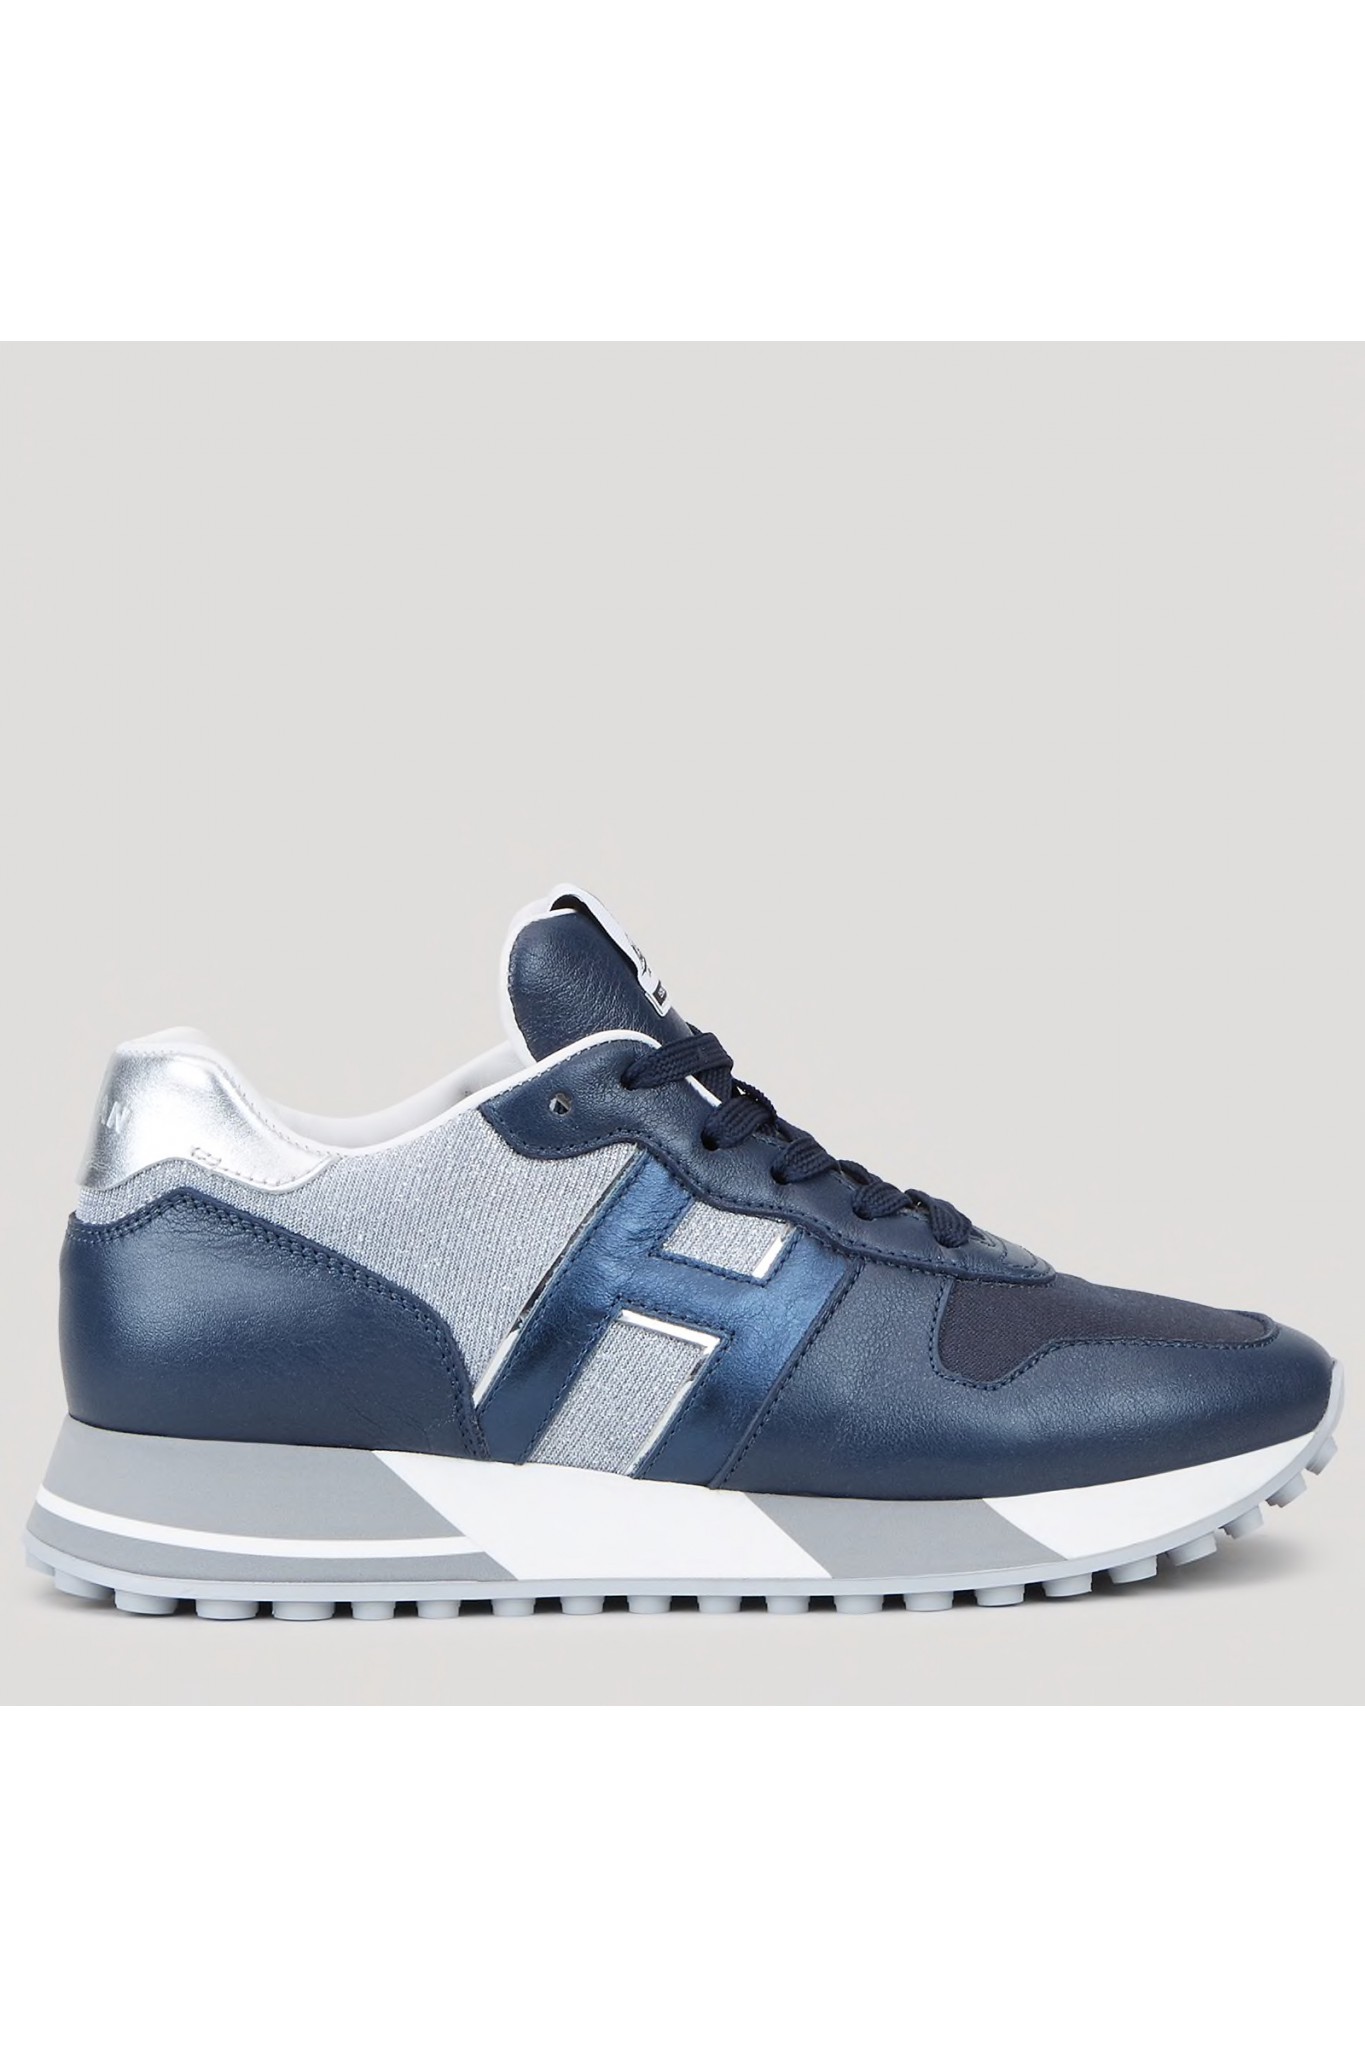 shop online Hogan H383 sneakers in navy leather and silver shiny canvas.